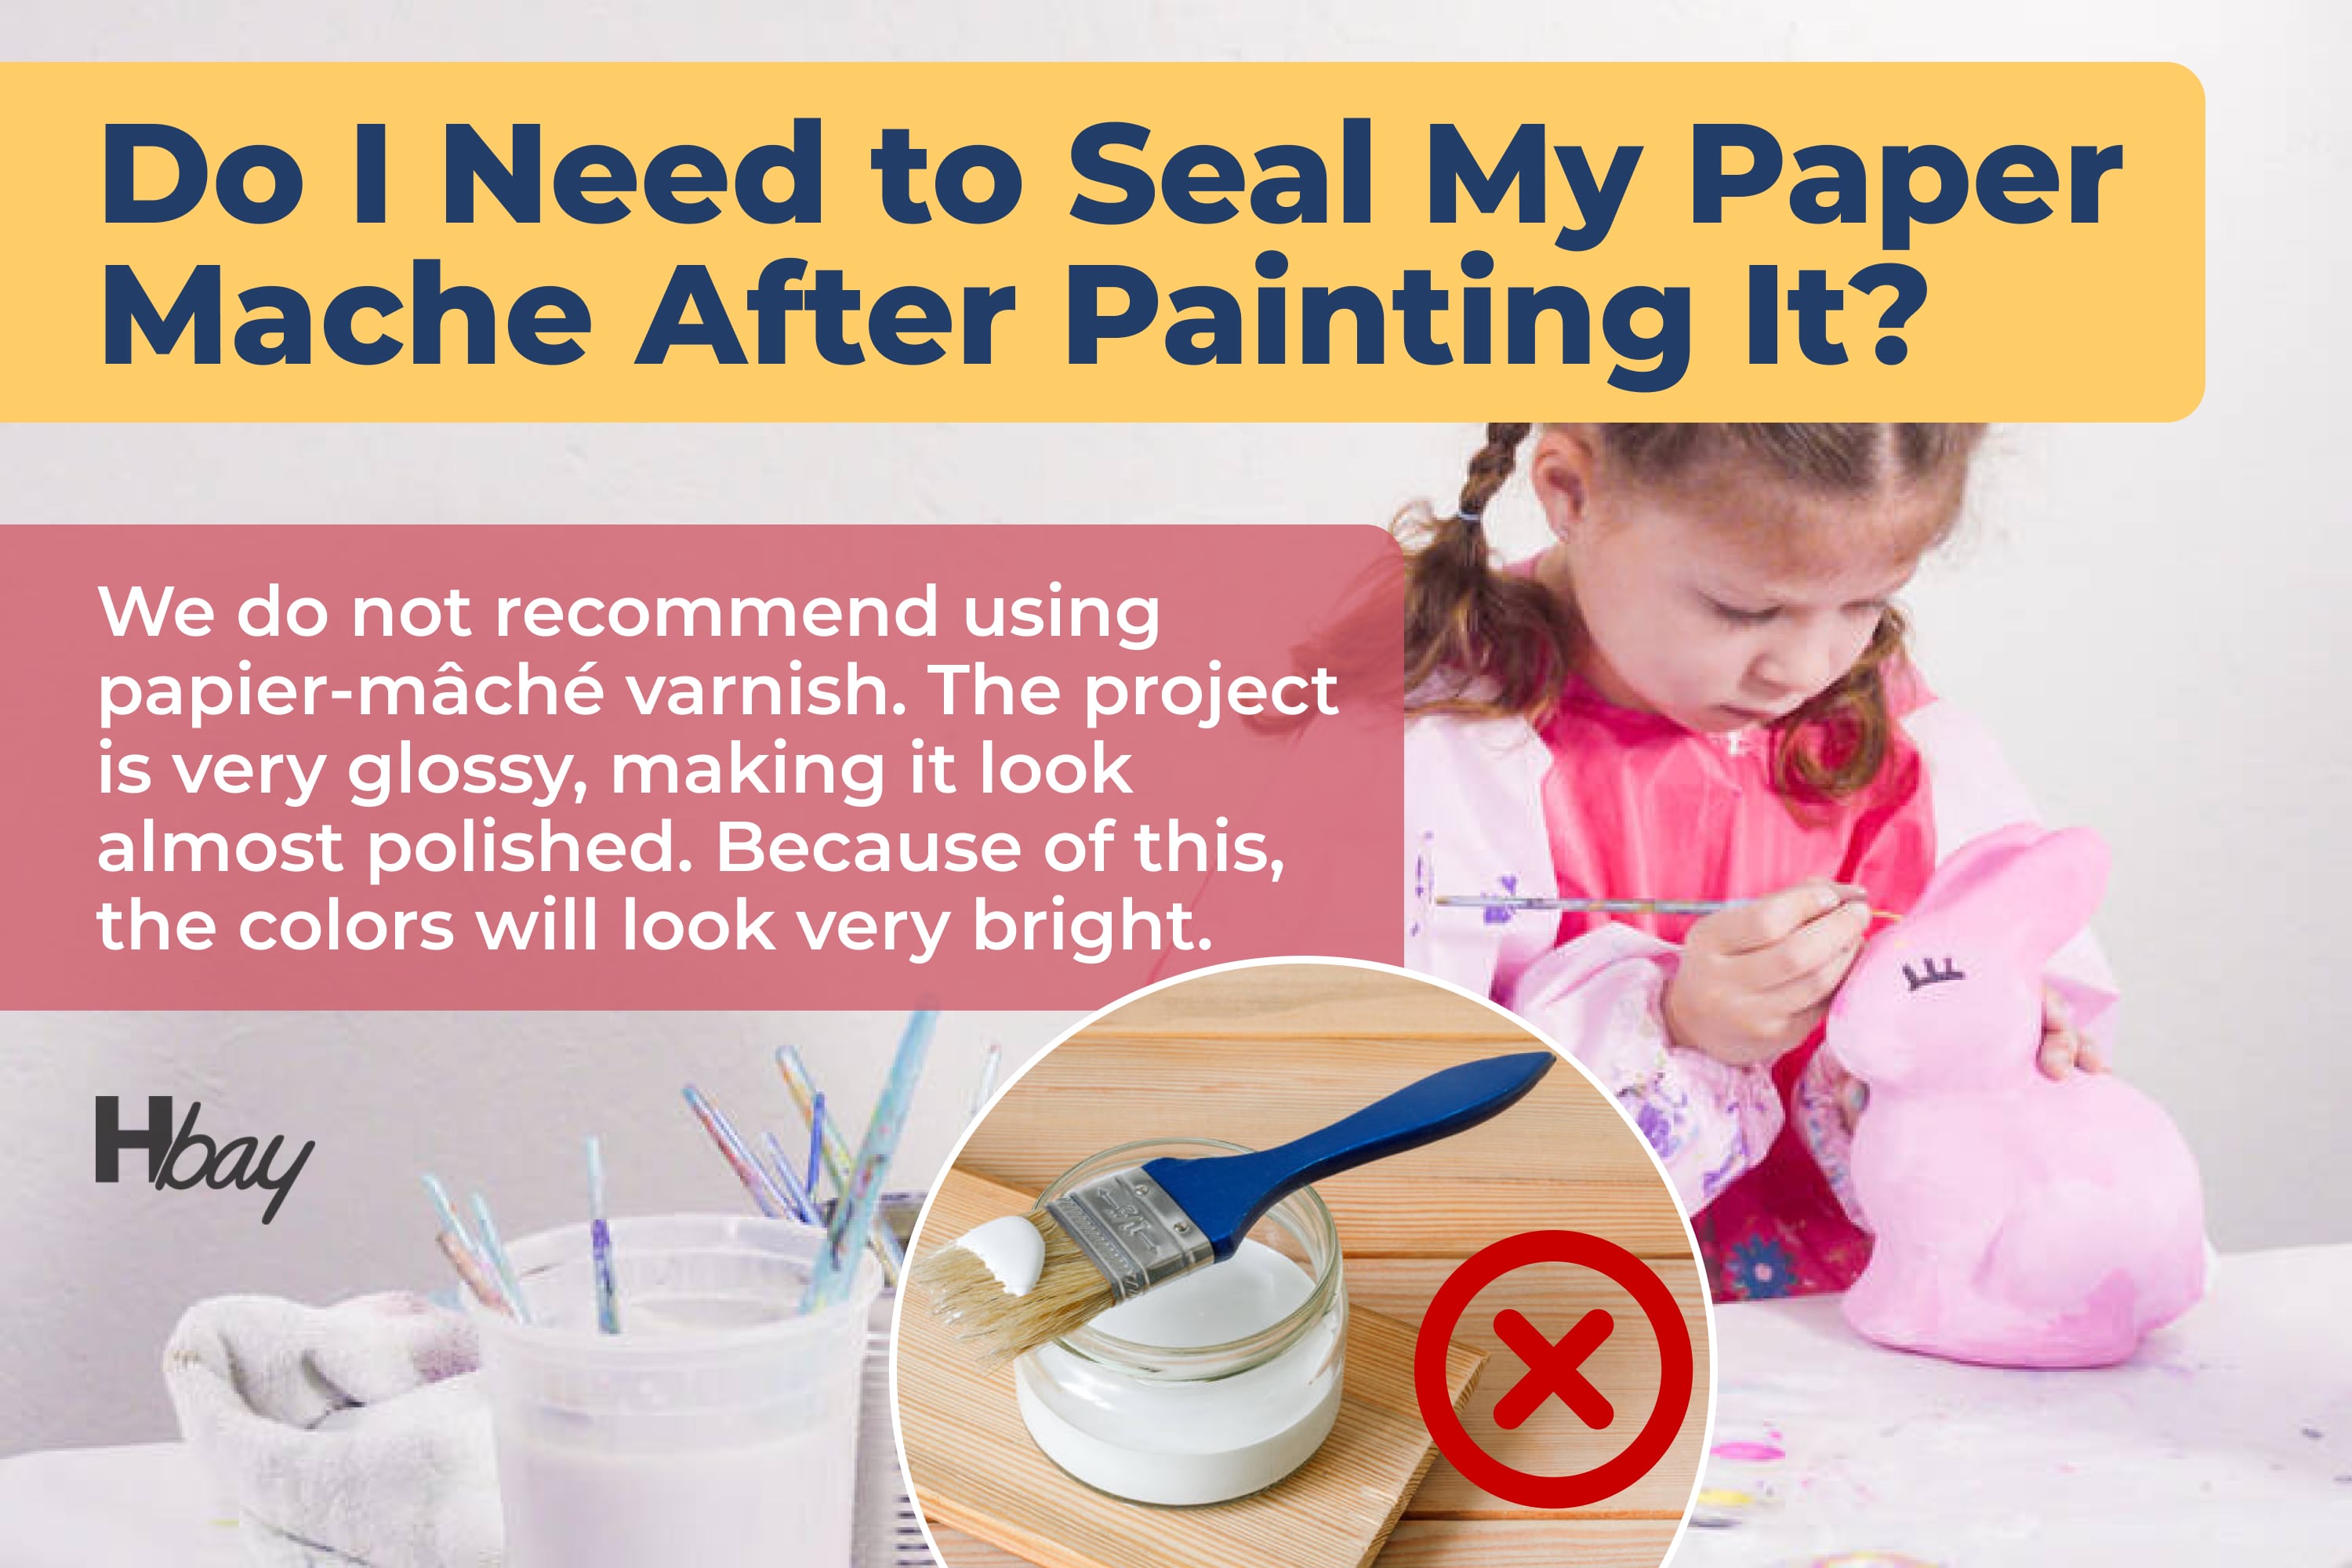 Do I Need to Seal My Paper Mache After Painting It